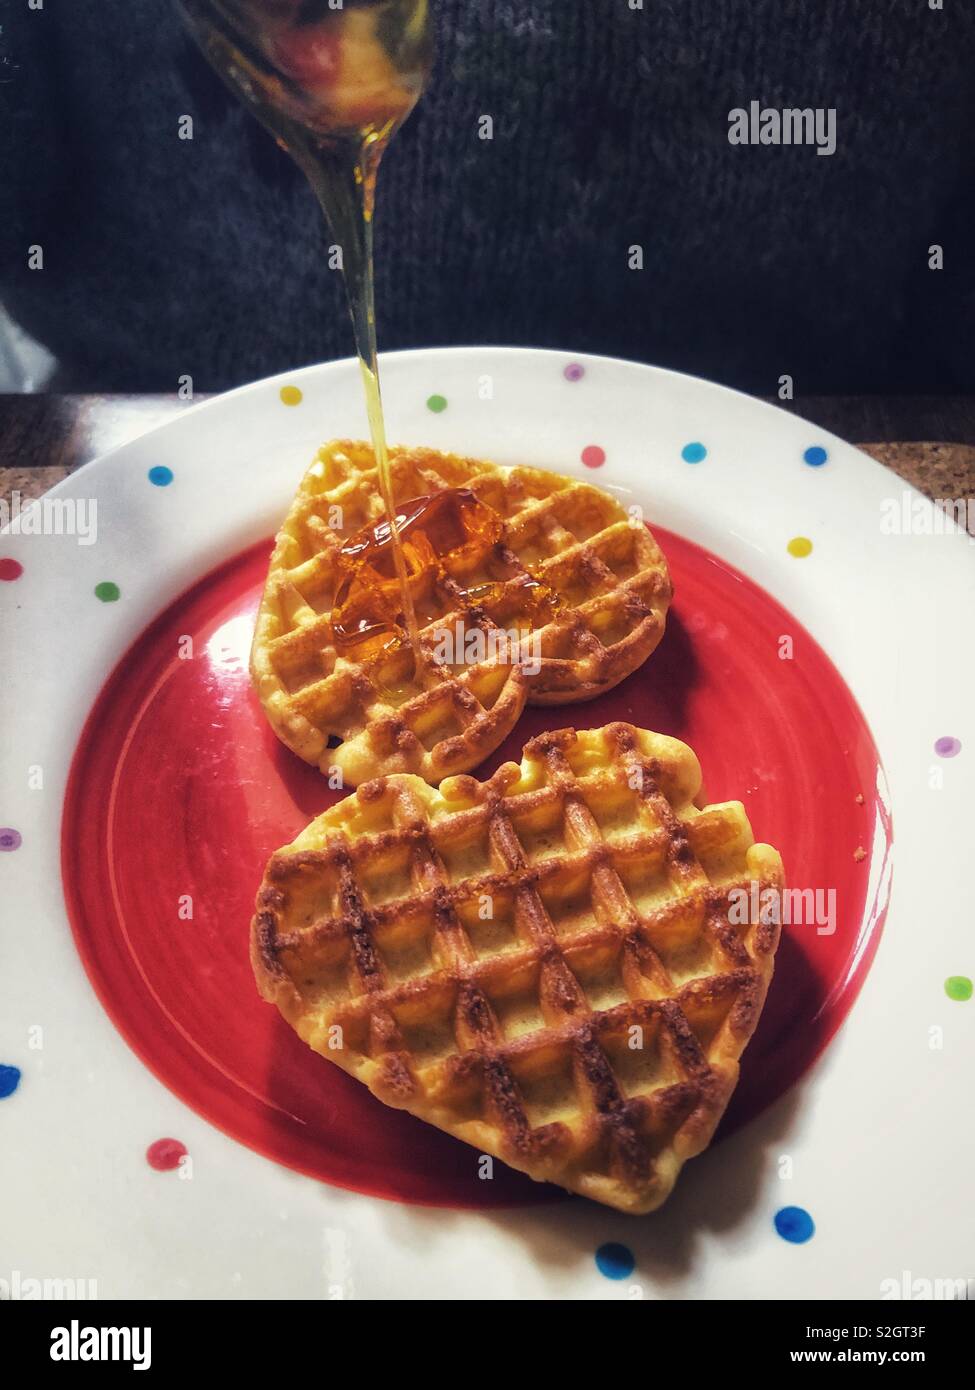 Valentine’s Day breakfast treat, heart shaped waffles with syrup Stock Photo